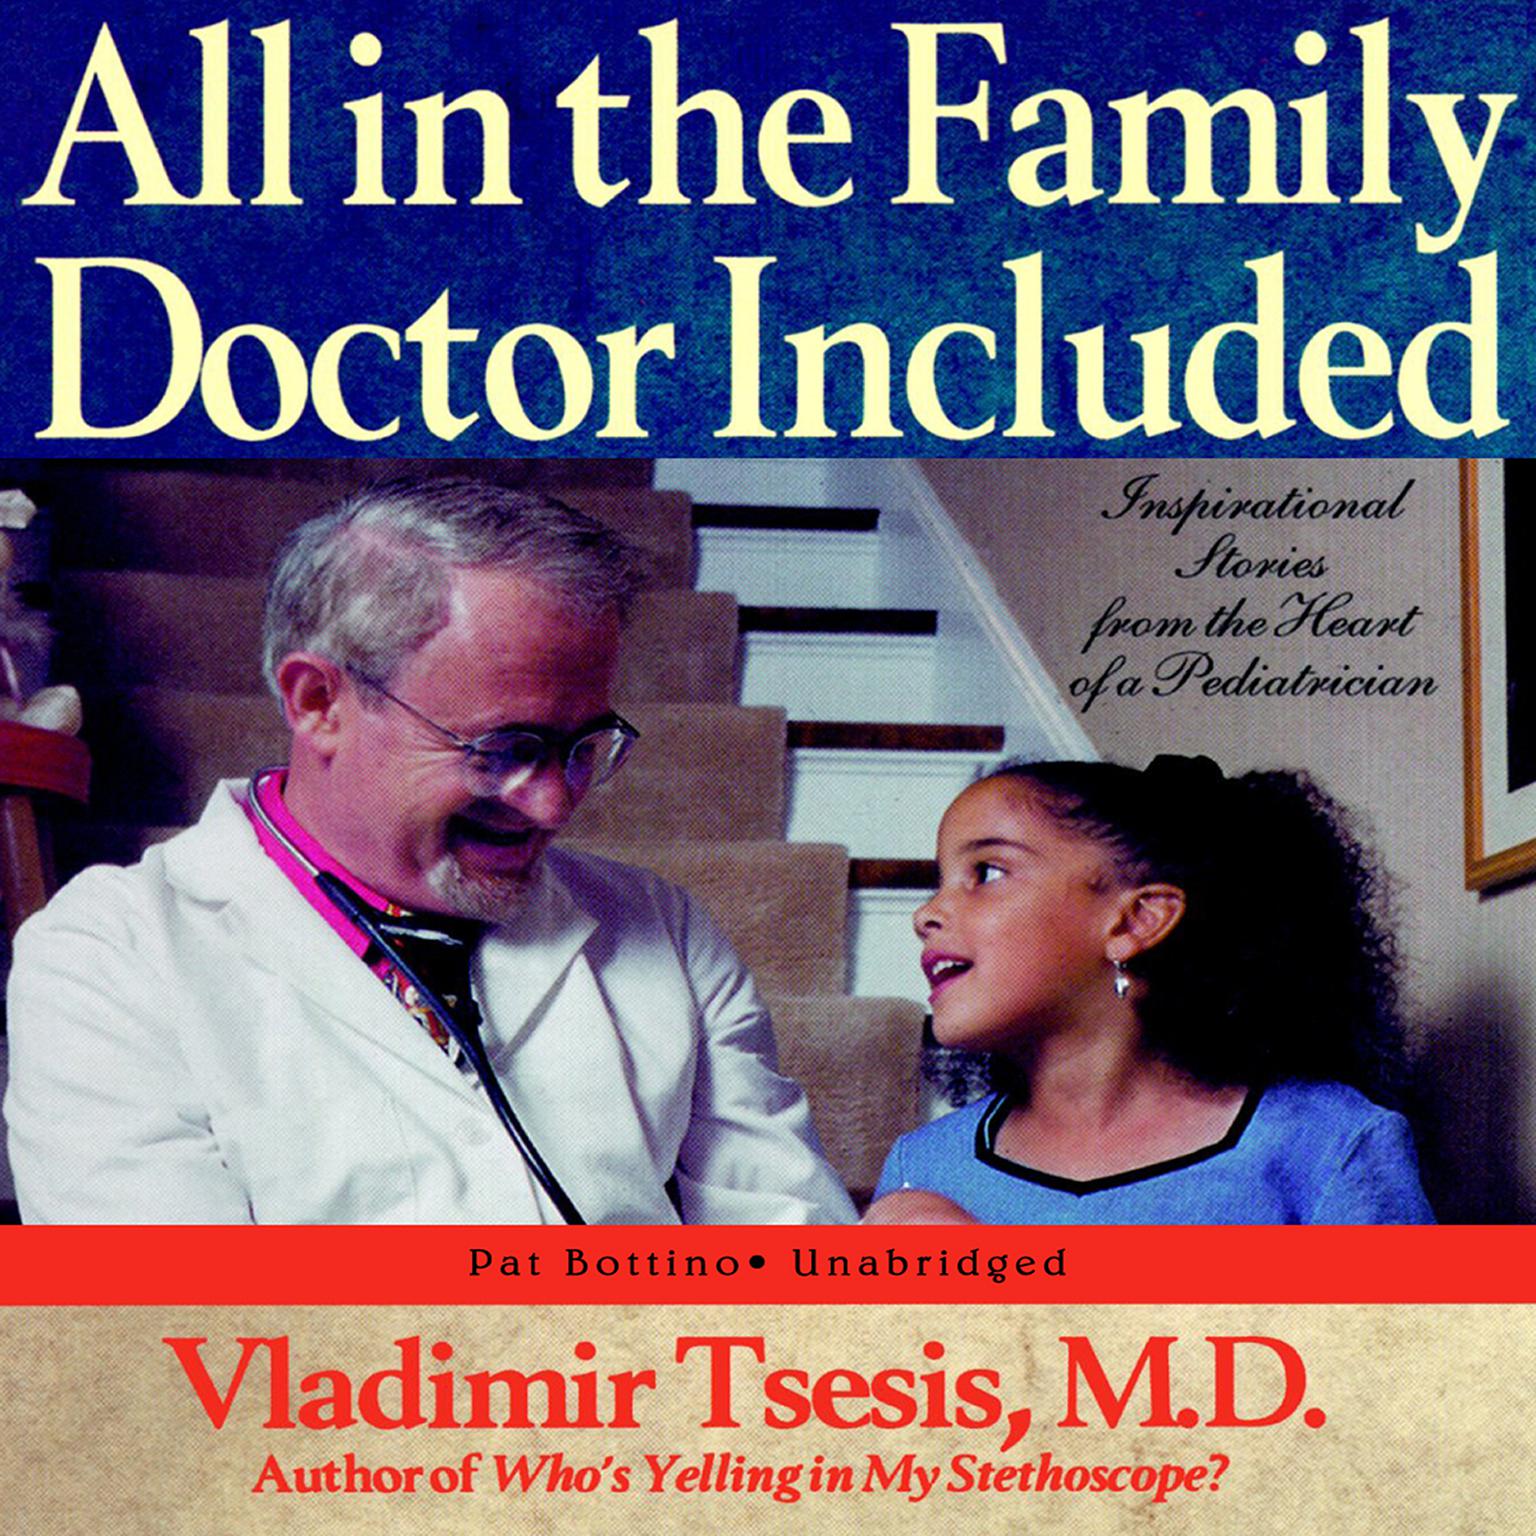 All in the Family, Doctor Included: Inspirational Stories from the Heart of a Pediatrician Audiobook, by Vladimir A. Tsesis